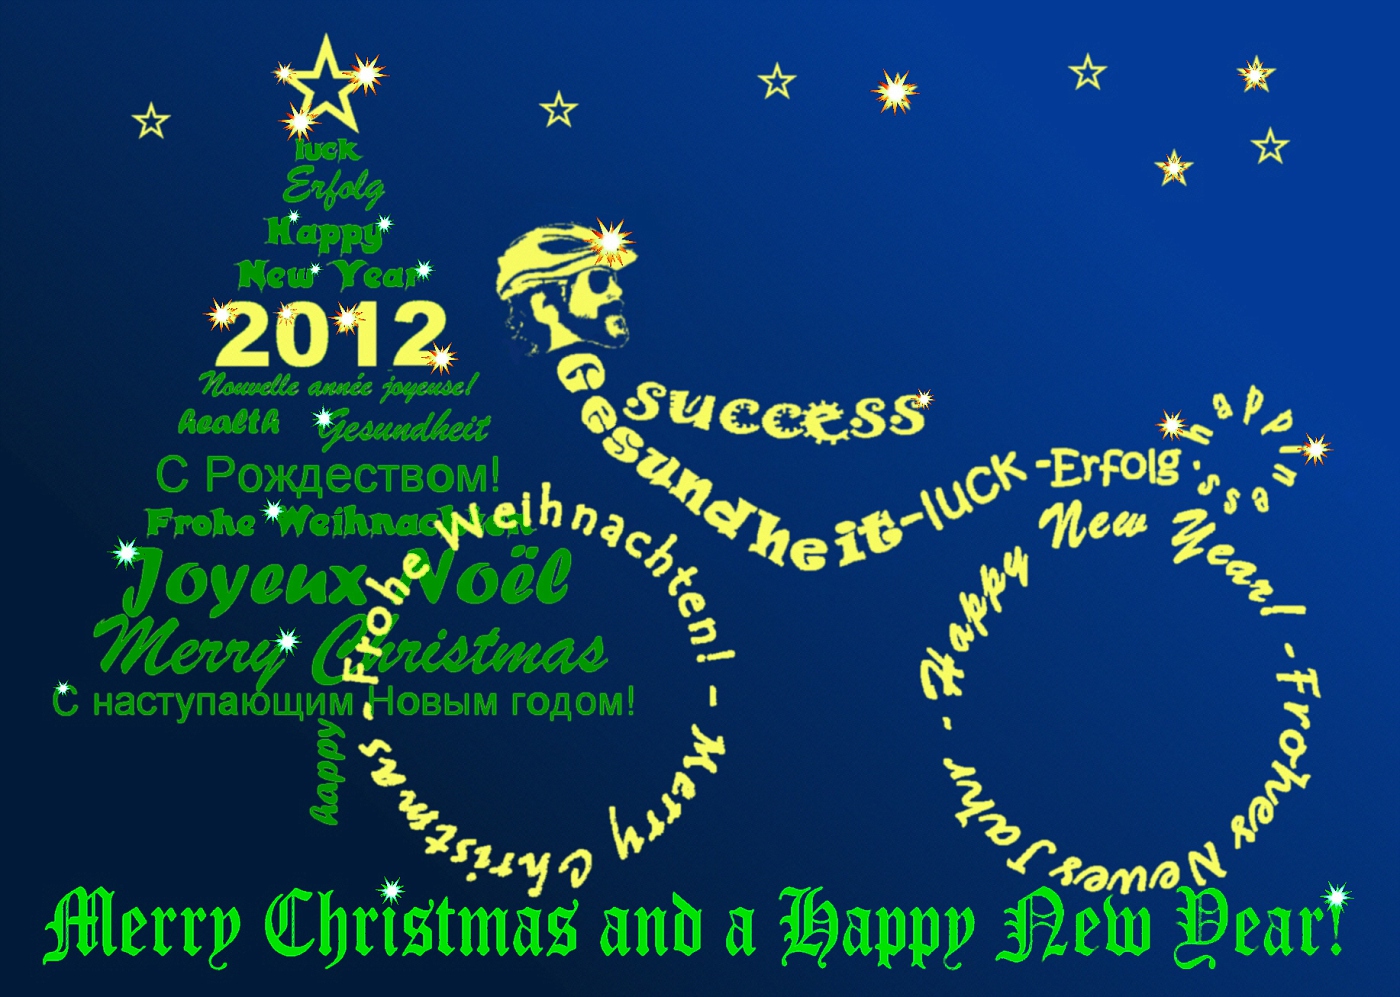 Merry Christmas and a Happy New Year 2012!